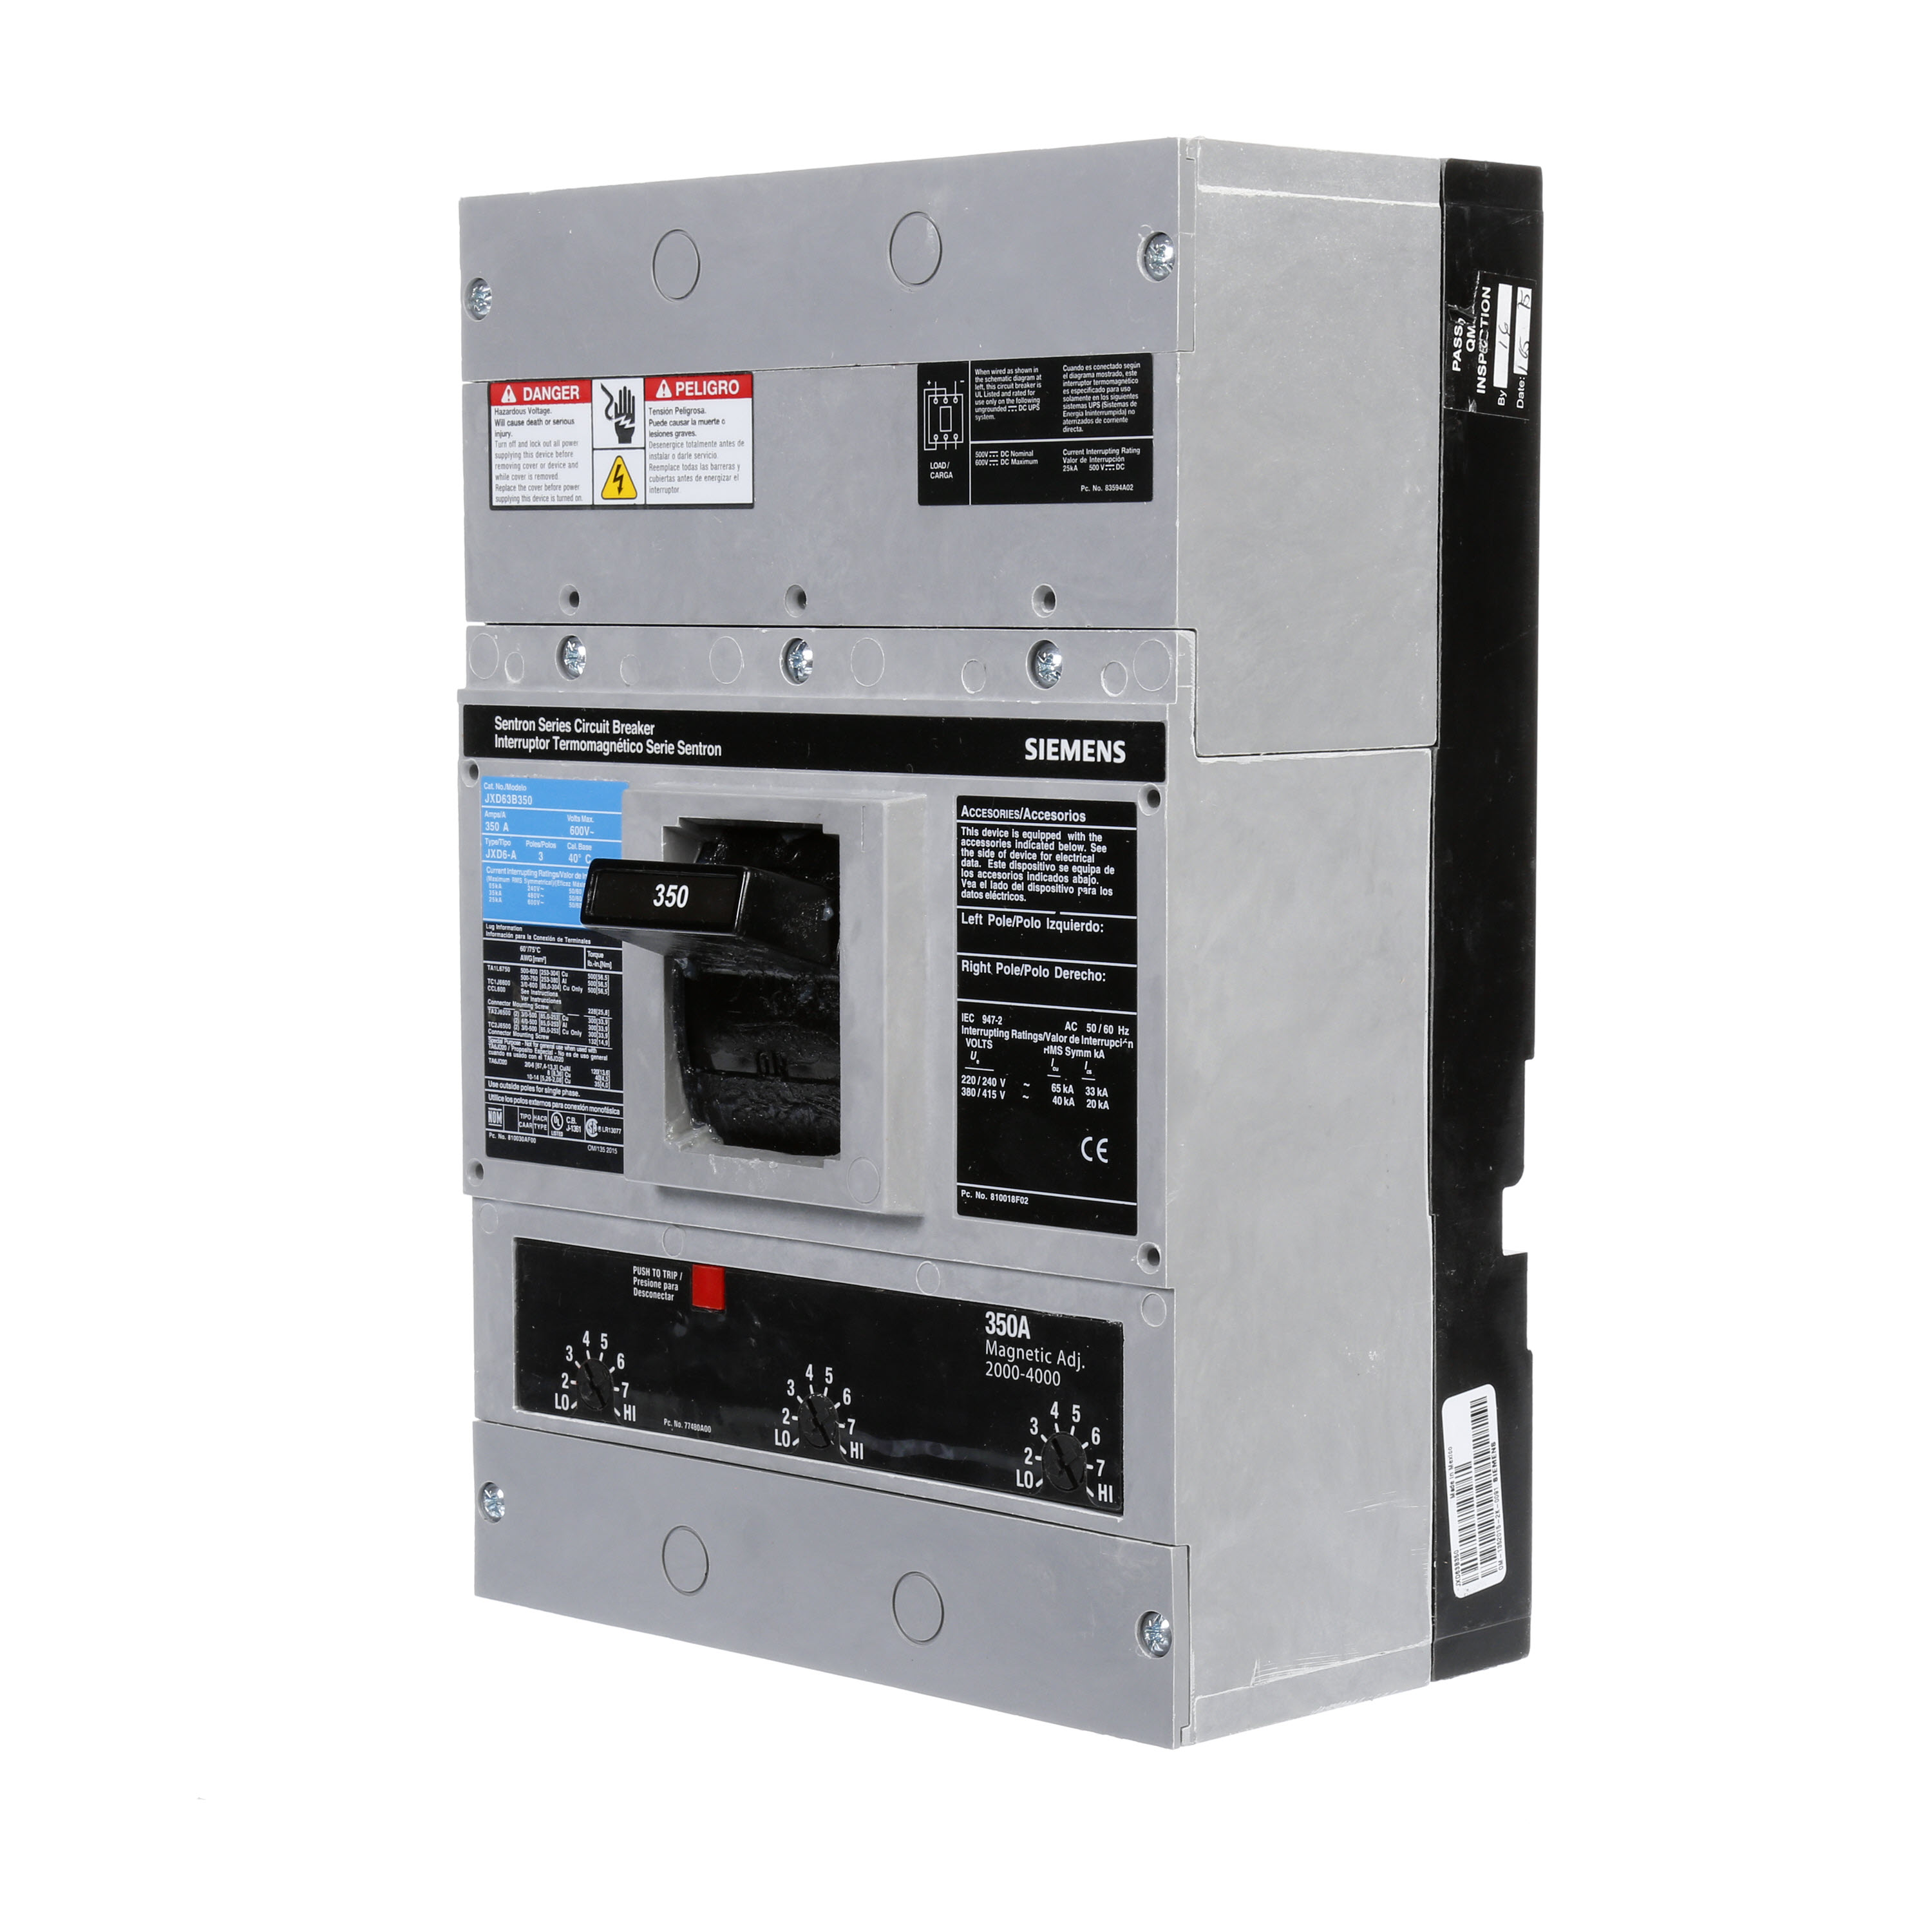 SIEMENS LOW VOLTAGE SENTRON MOLDED CASE CIRCUIT BREAKER WITH THERMAL - MAGNETICTRIP UNIT. ASSEMBLED STANDARD 40 DEG C BREAKER JD FRAME WITH STANDARD BREAKING CAPACITY. 350A 3-POLE (25KAIC AT 600V) (35KAIC AT 480V). NON-INTERCHANGEABLE TRIP UNIT. SPECIAL FEATURES NO LUGS INSTALLED. DIMENSIONS (W x H x D) IN 7.50 x 11.0 x 4.00.